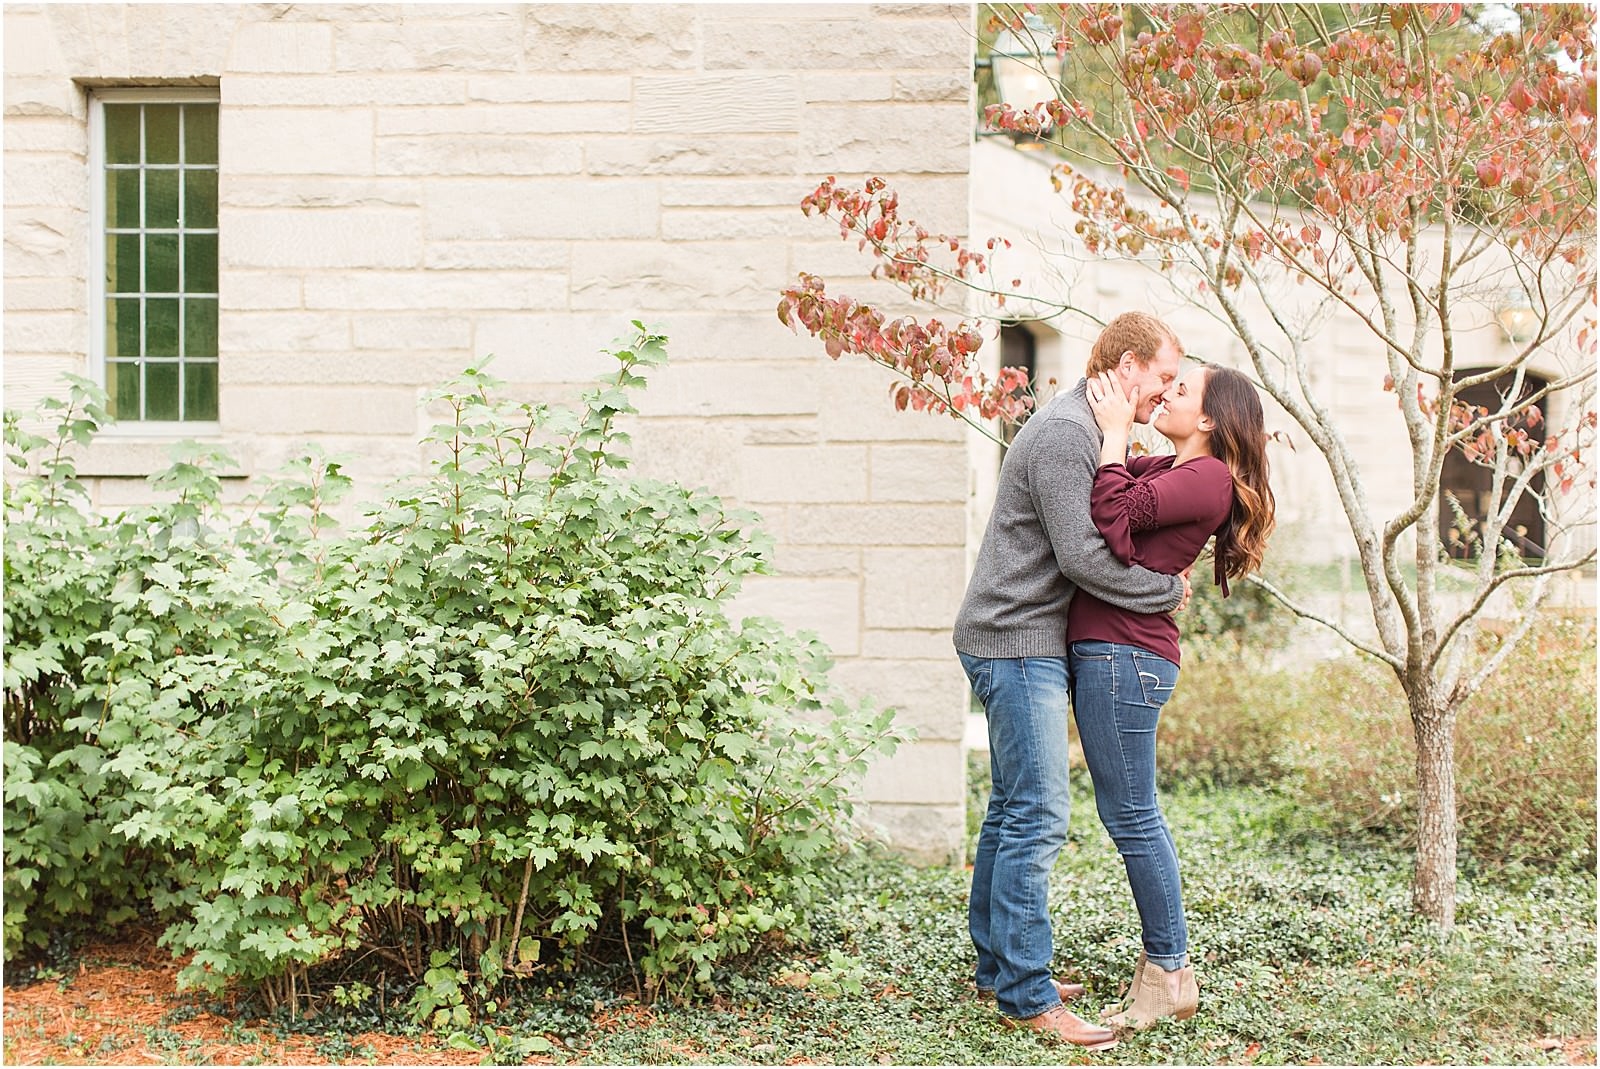 A Lincoln State Park Engagemtent Session | Deidra and Andrew | Bret and Brandie Photography 0016.jpg